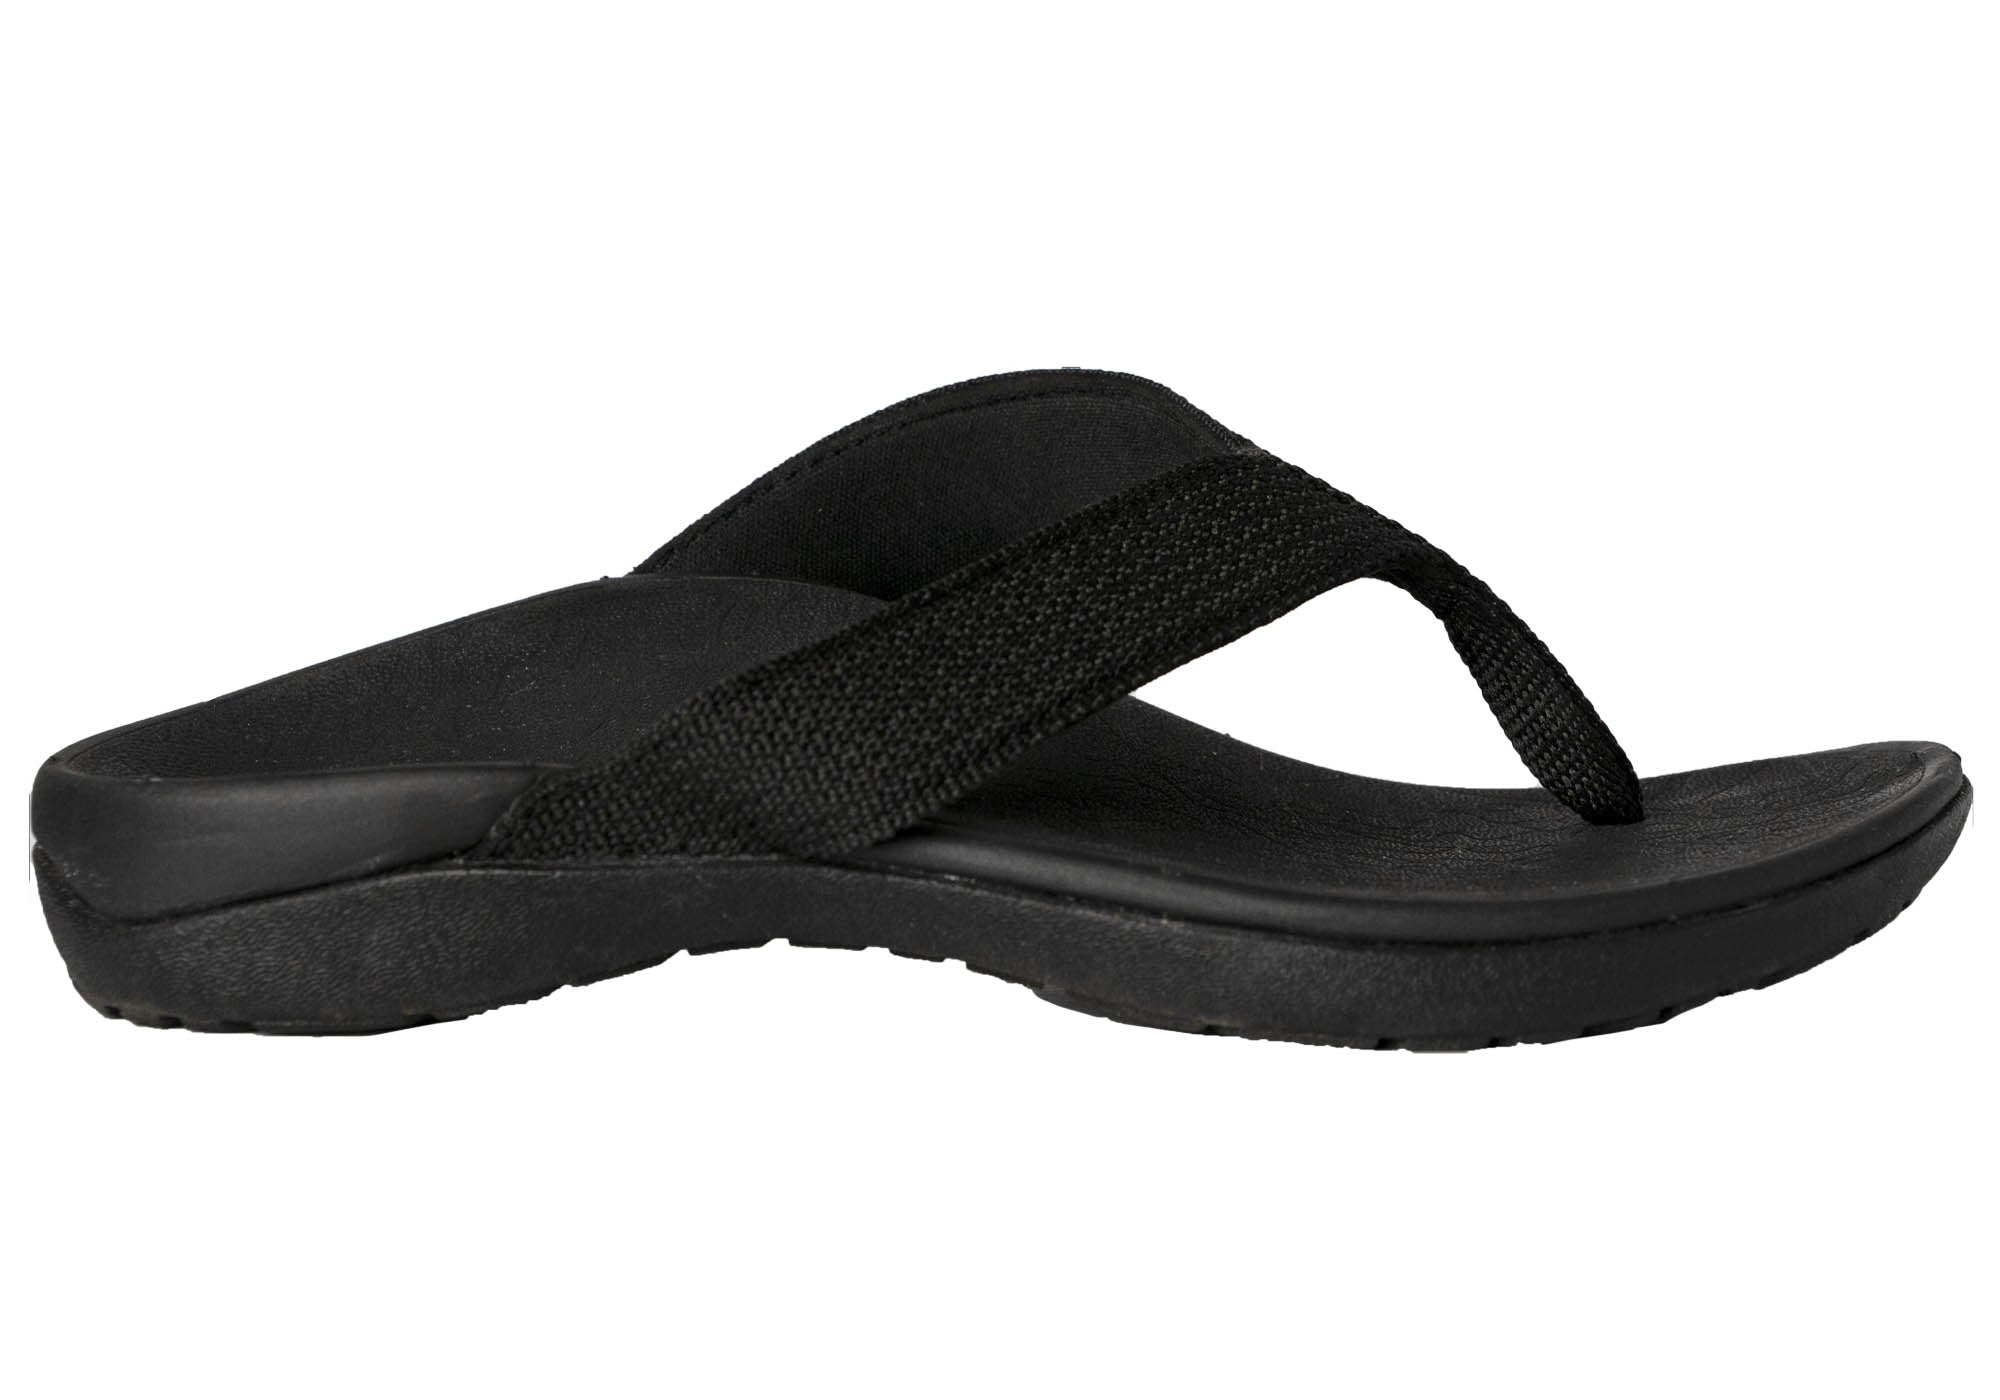 fit flops with arch support